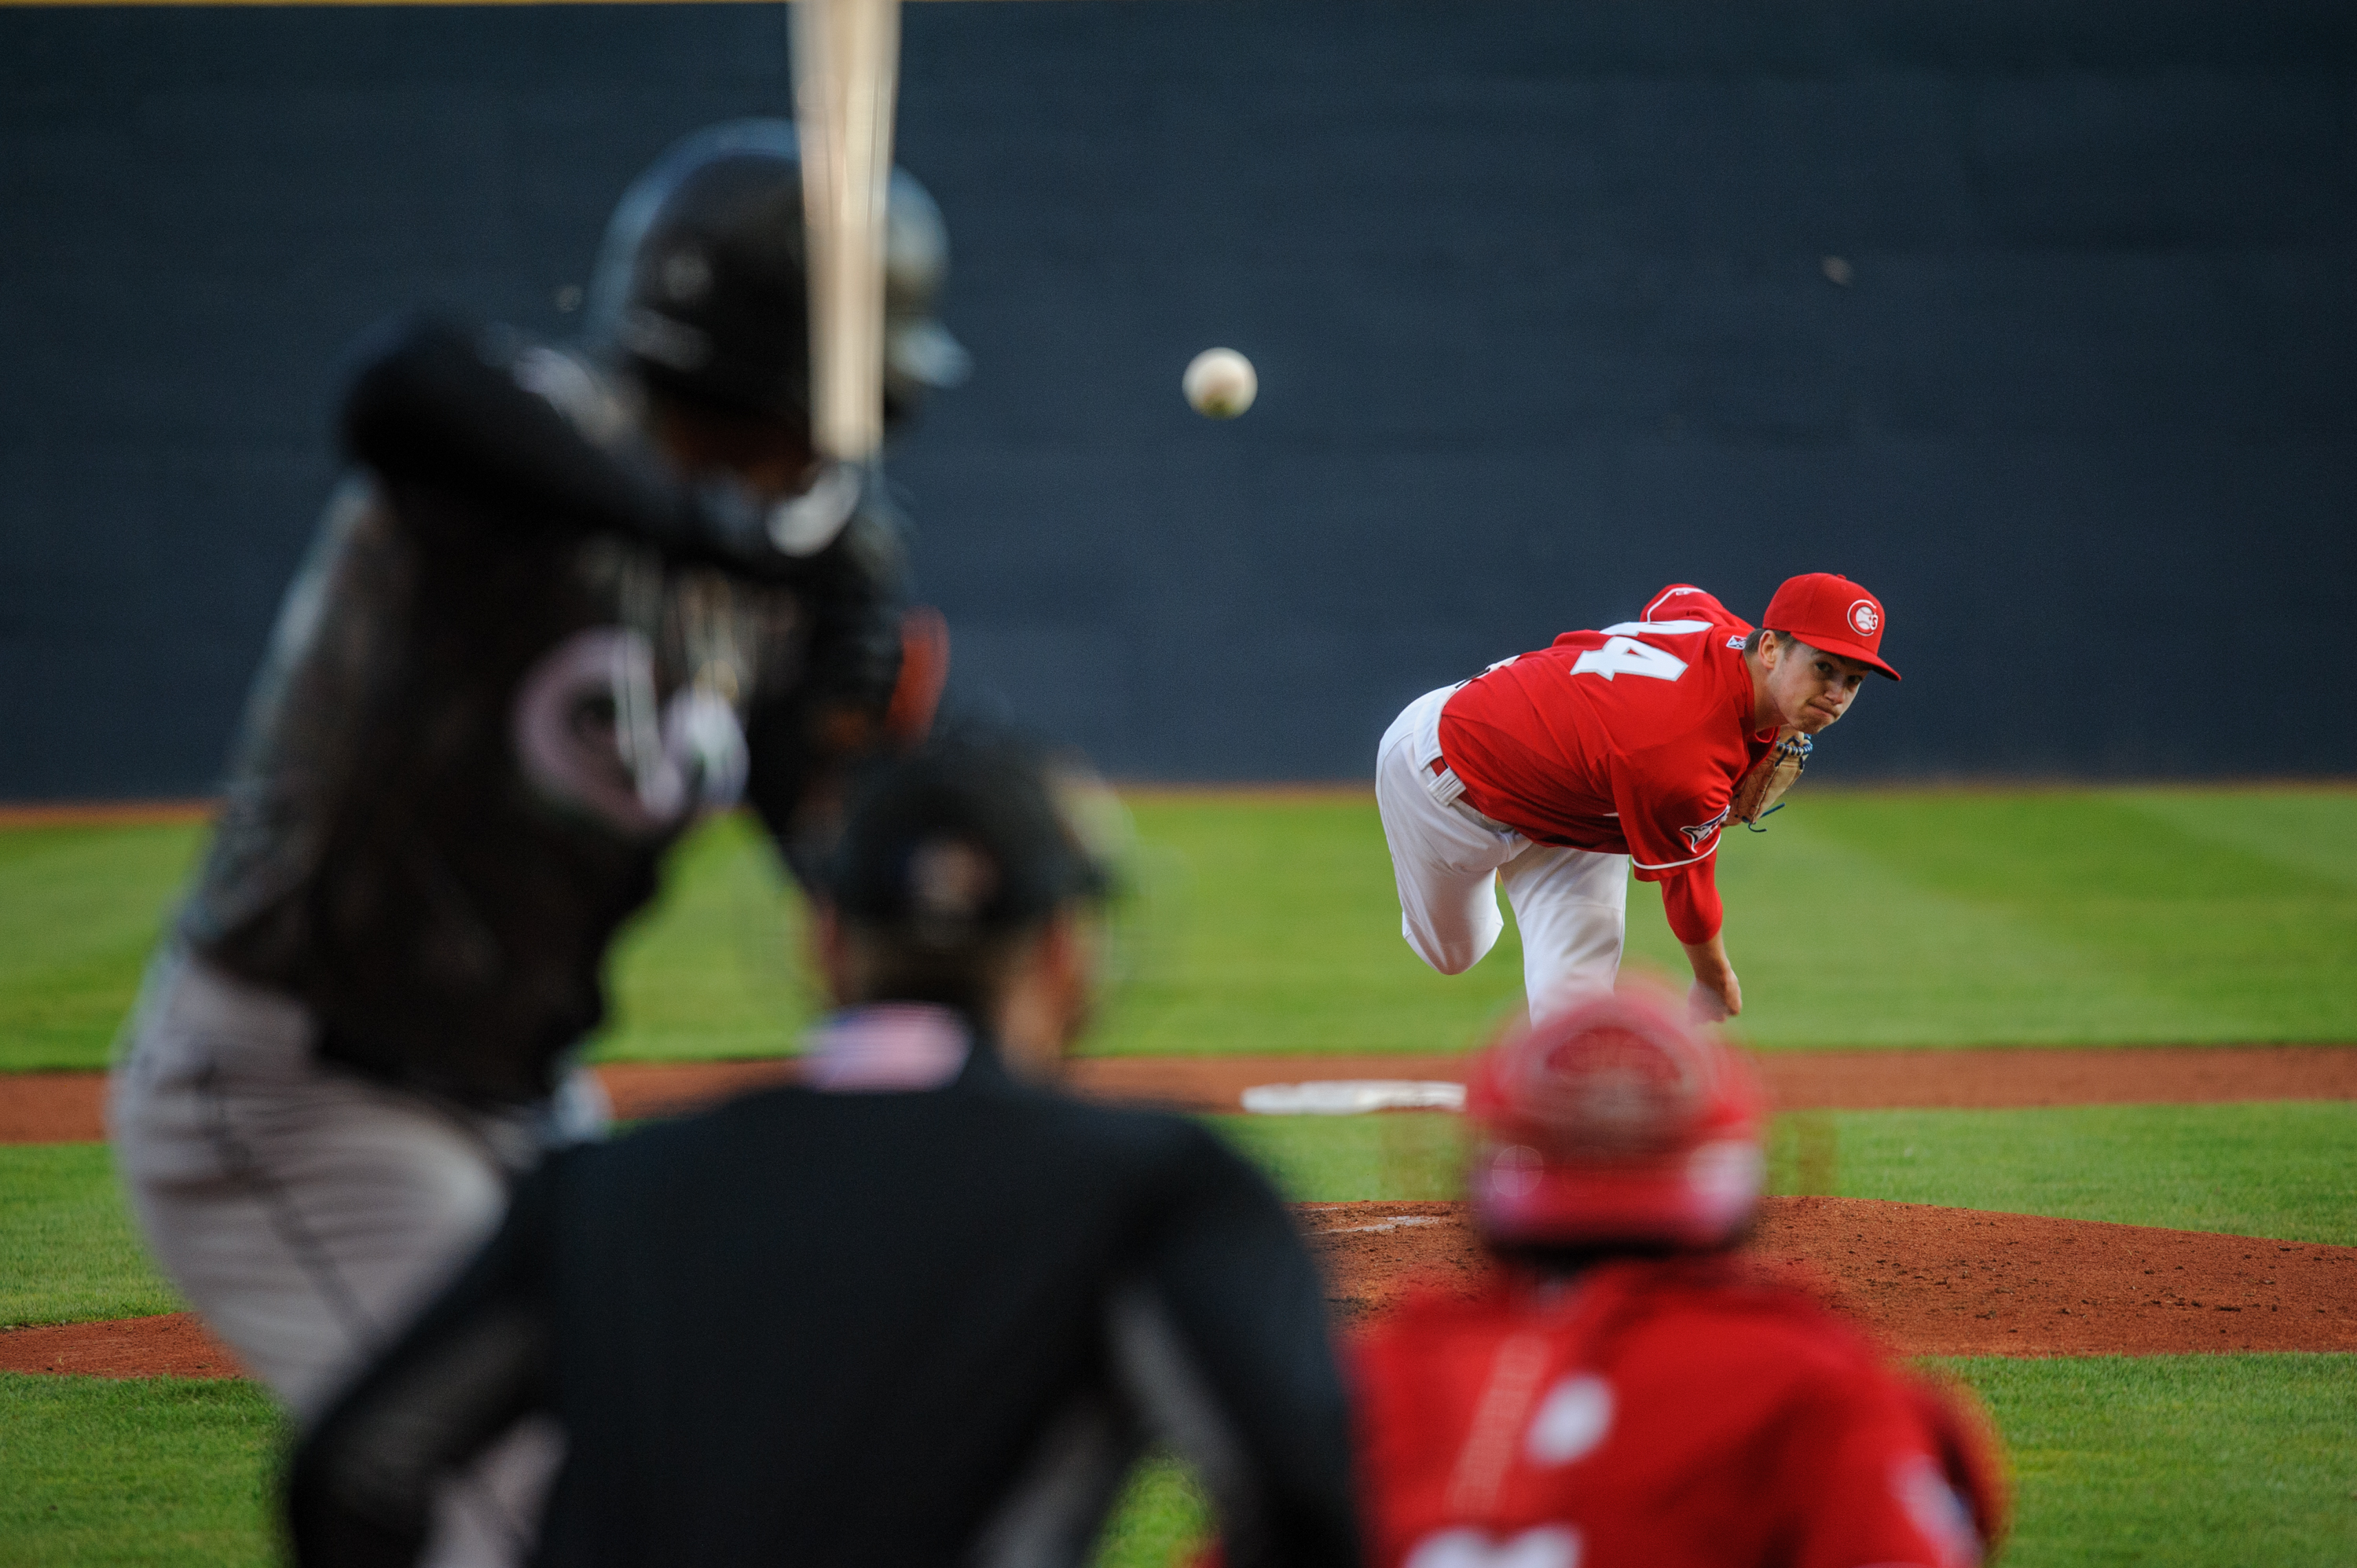 How to watch Vancouver Canadians baseball games online